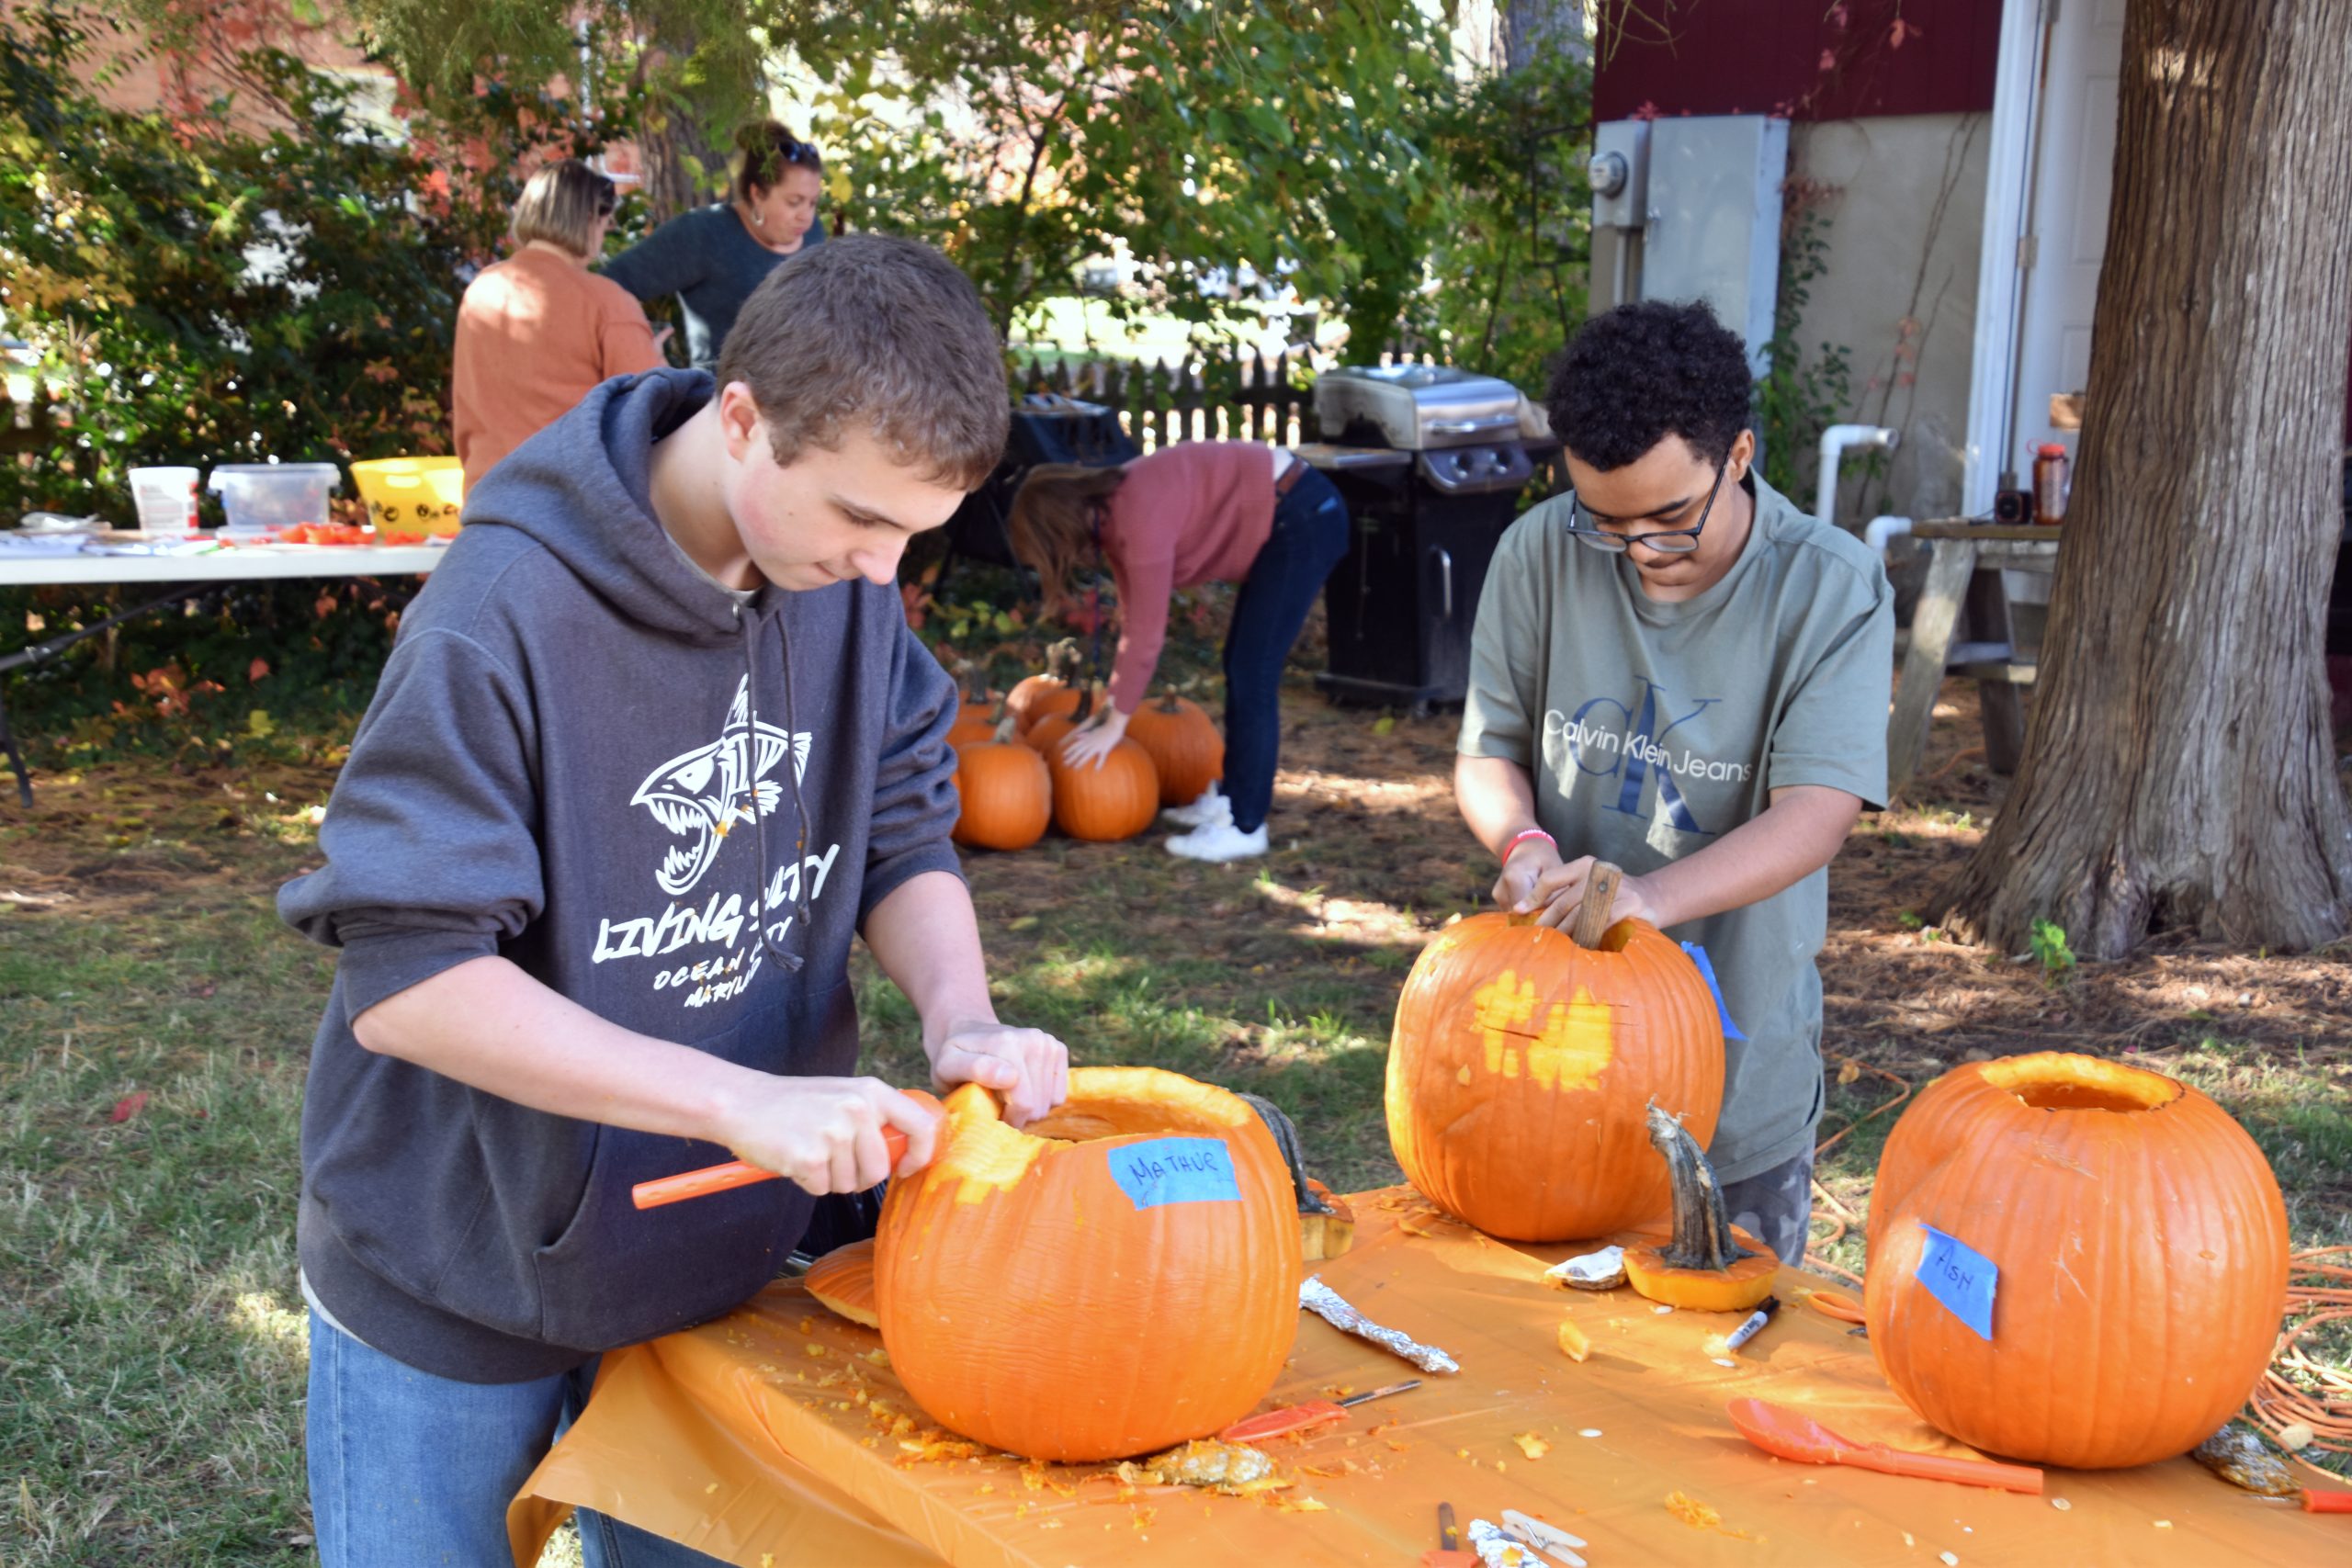 Two young people carve pumpkins.